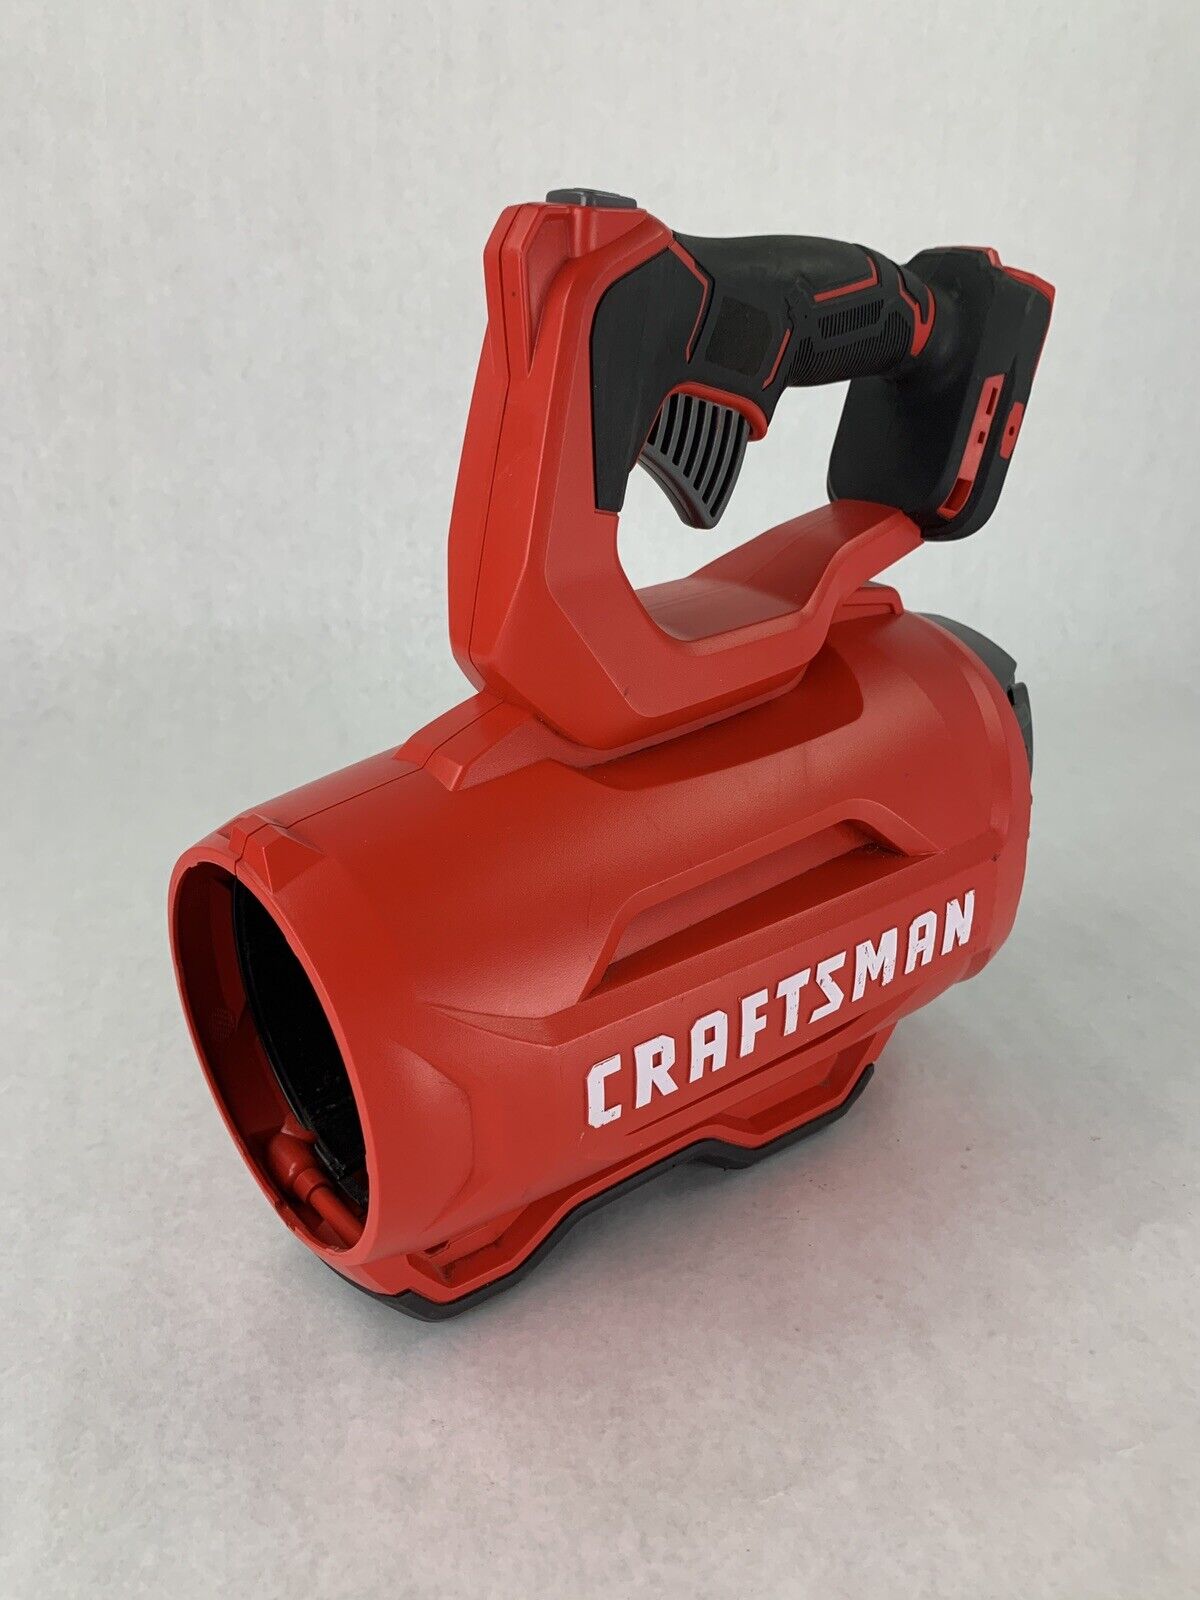 Craftsman CMCBL720 Blower For Parts and Repair